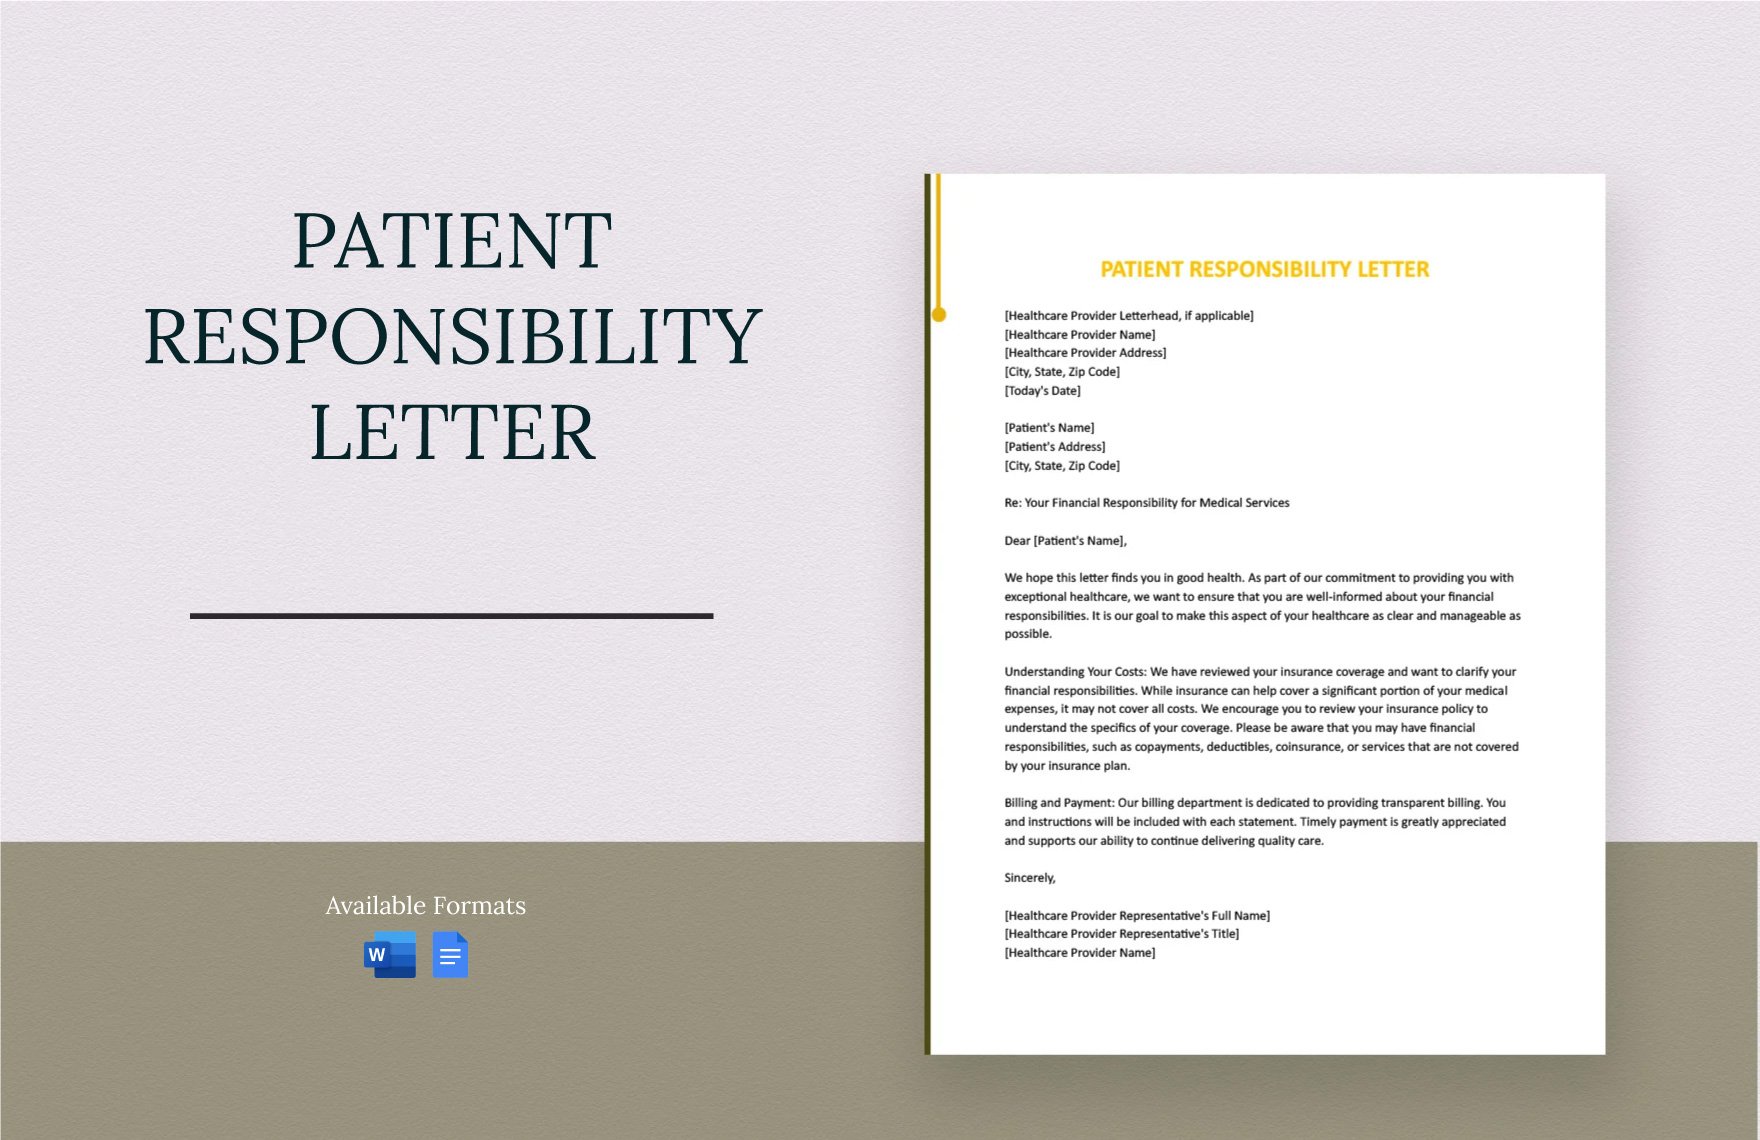 Patient Responsibility Letter in Word, Google Docs